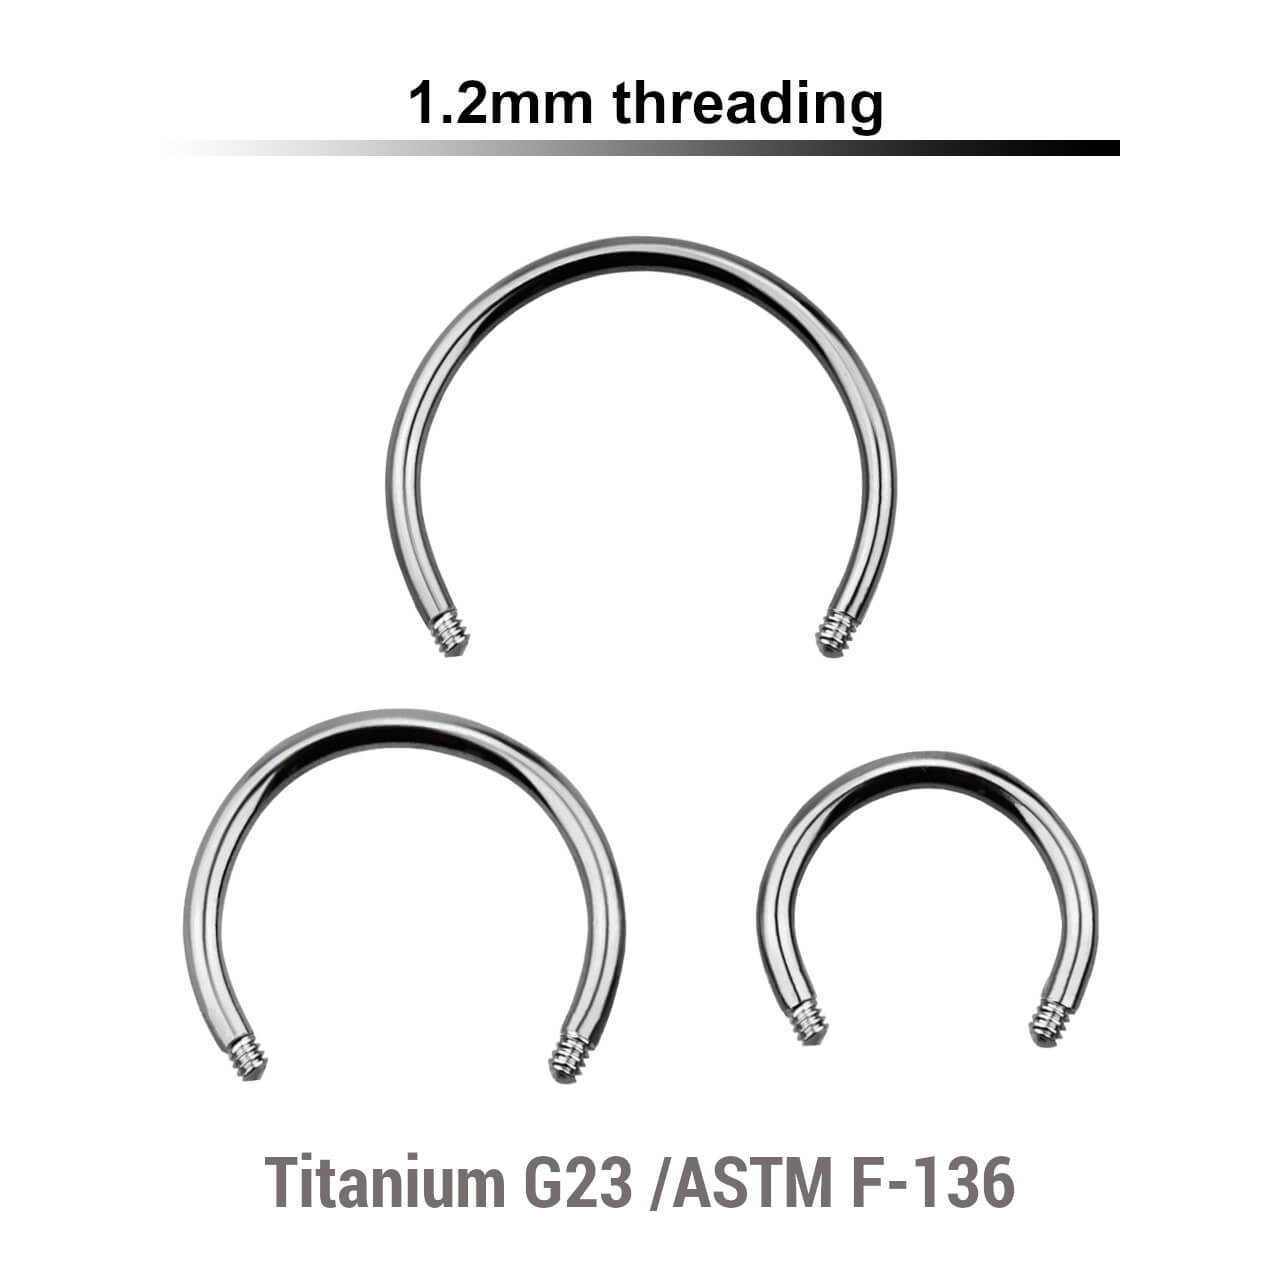 TYCB12N Piercing studio supplies: Pack of 25 pcs. of circular barbell posts in high polished titanium G23, thickness 1.2mm